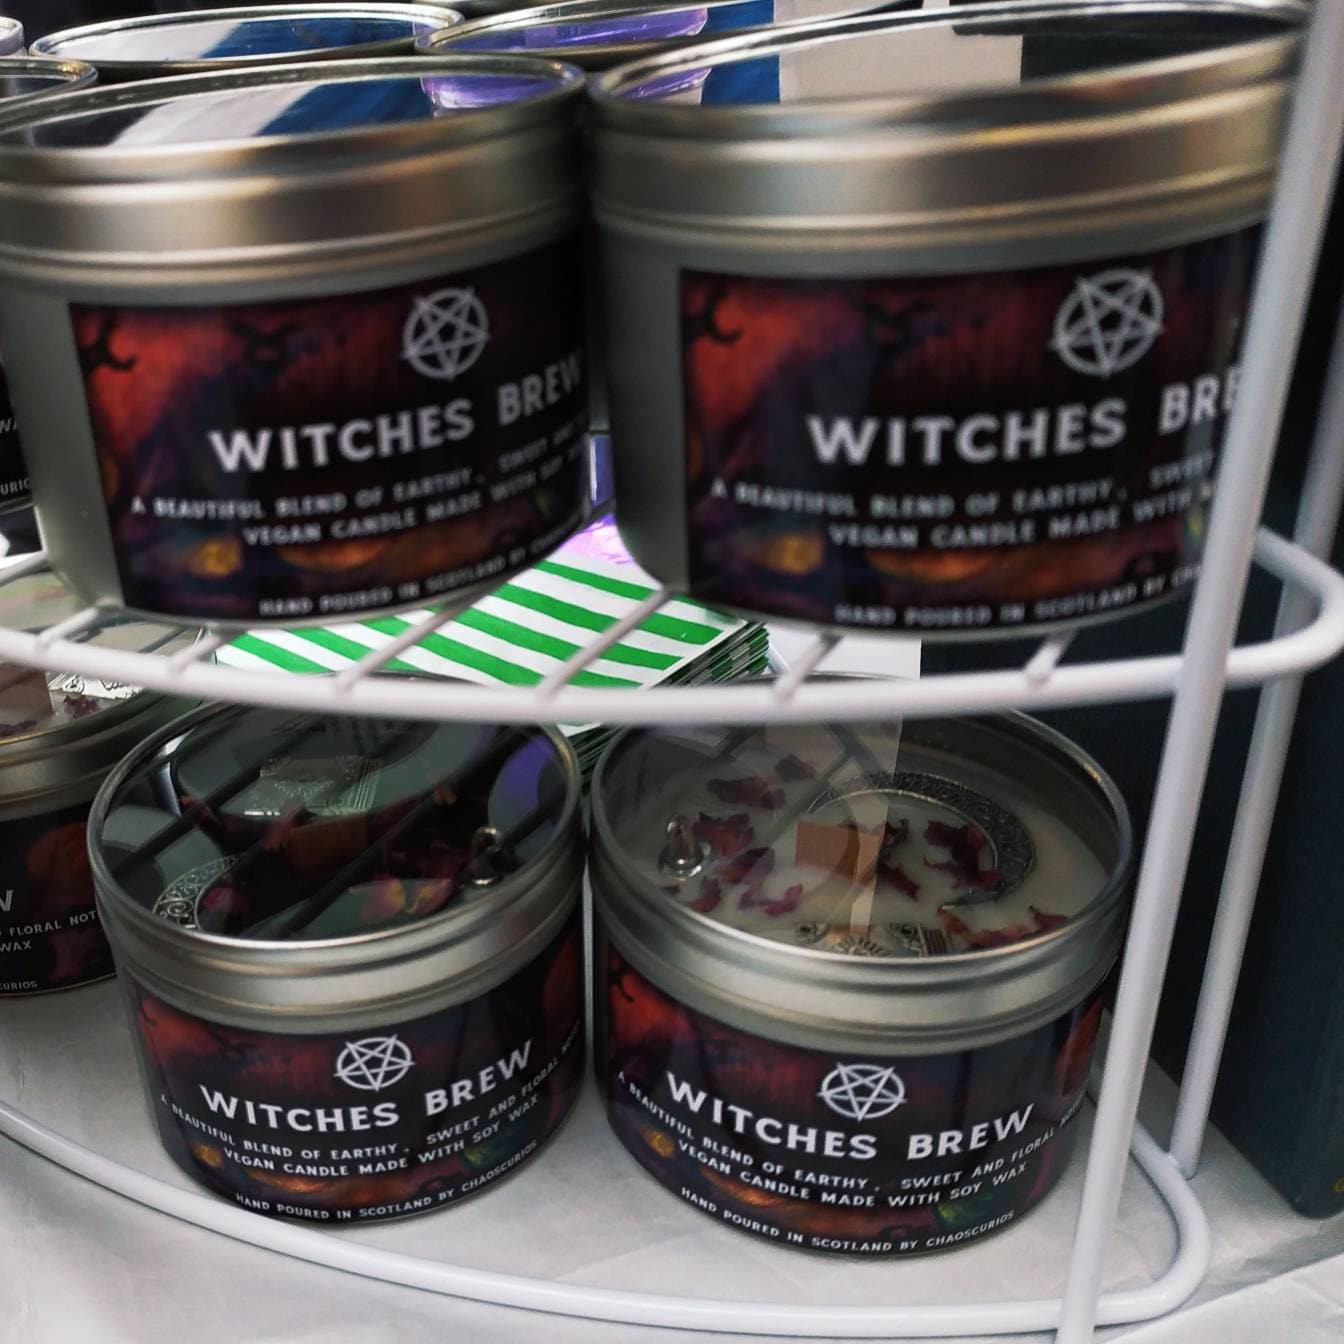 Witches Brew, Vegan Soy Candle, Witchy Aesthetic, Witchy Vibes, Moon Candle, Pentacle Candle, Pentagram Candle, Book of Spells, 35+ Hours